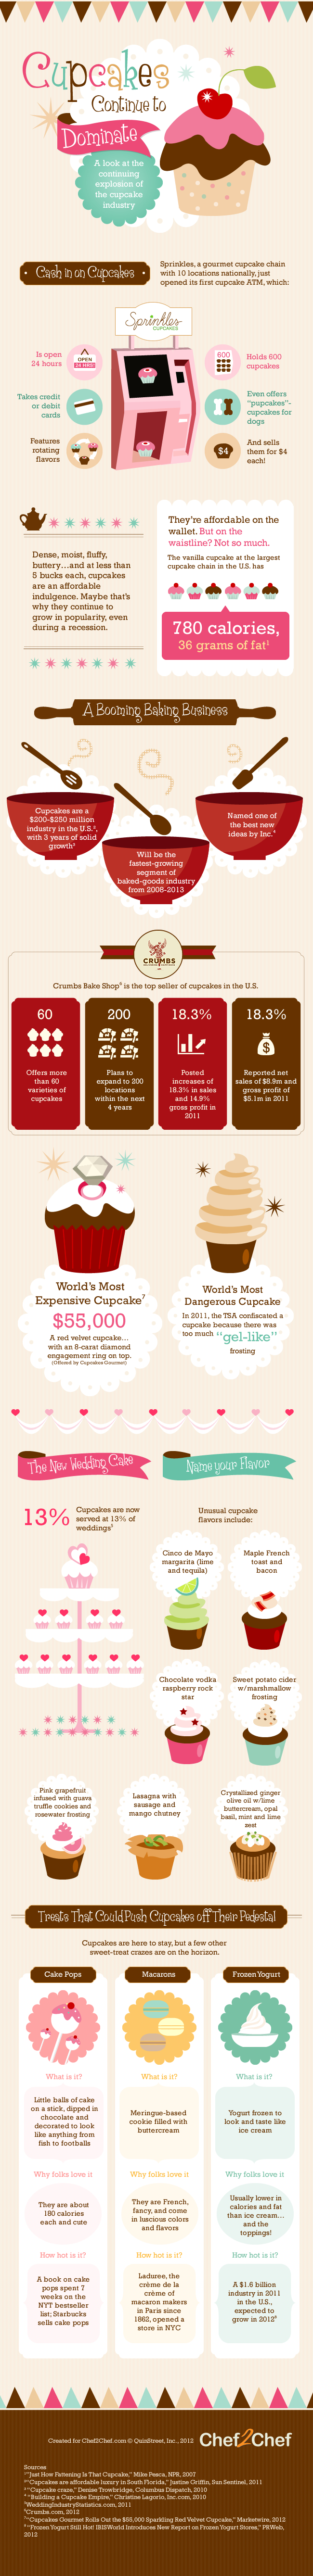 cupcakes continue to dominate {infographic}